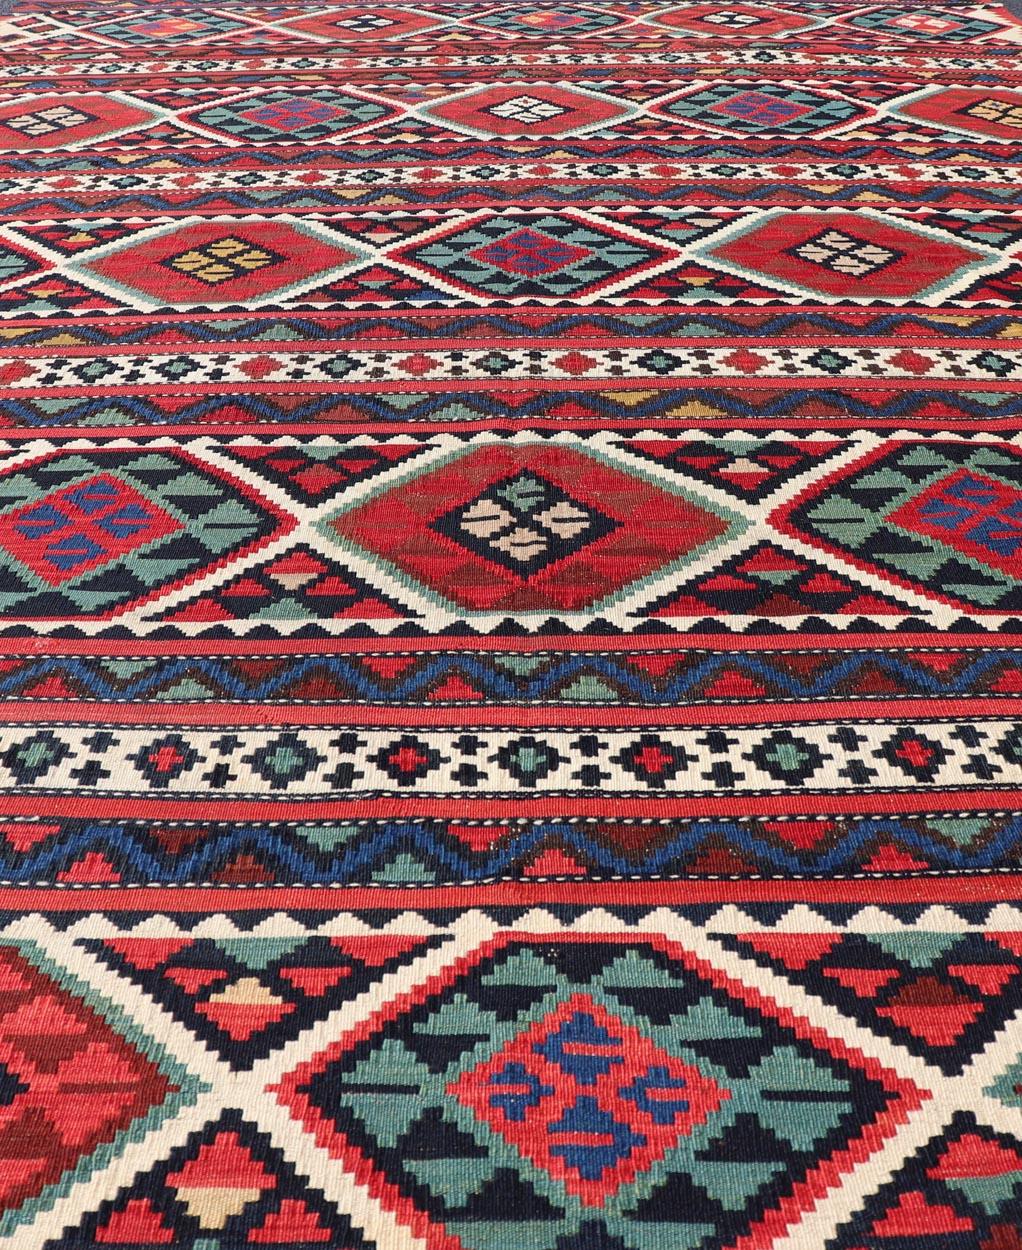 Hand-Woven 19th Century Antique Shirvan Kilim with Intricate Design in with Vibrant Colors For Sale